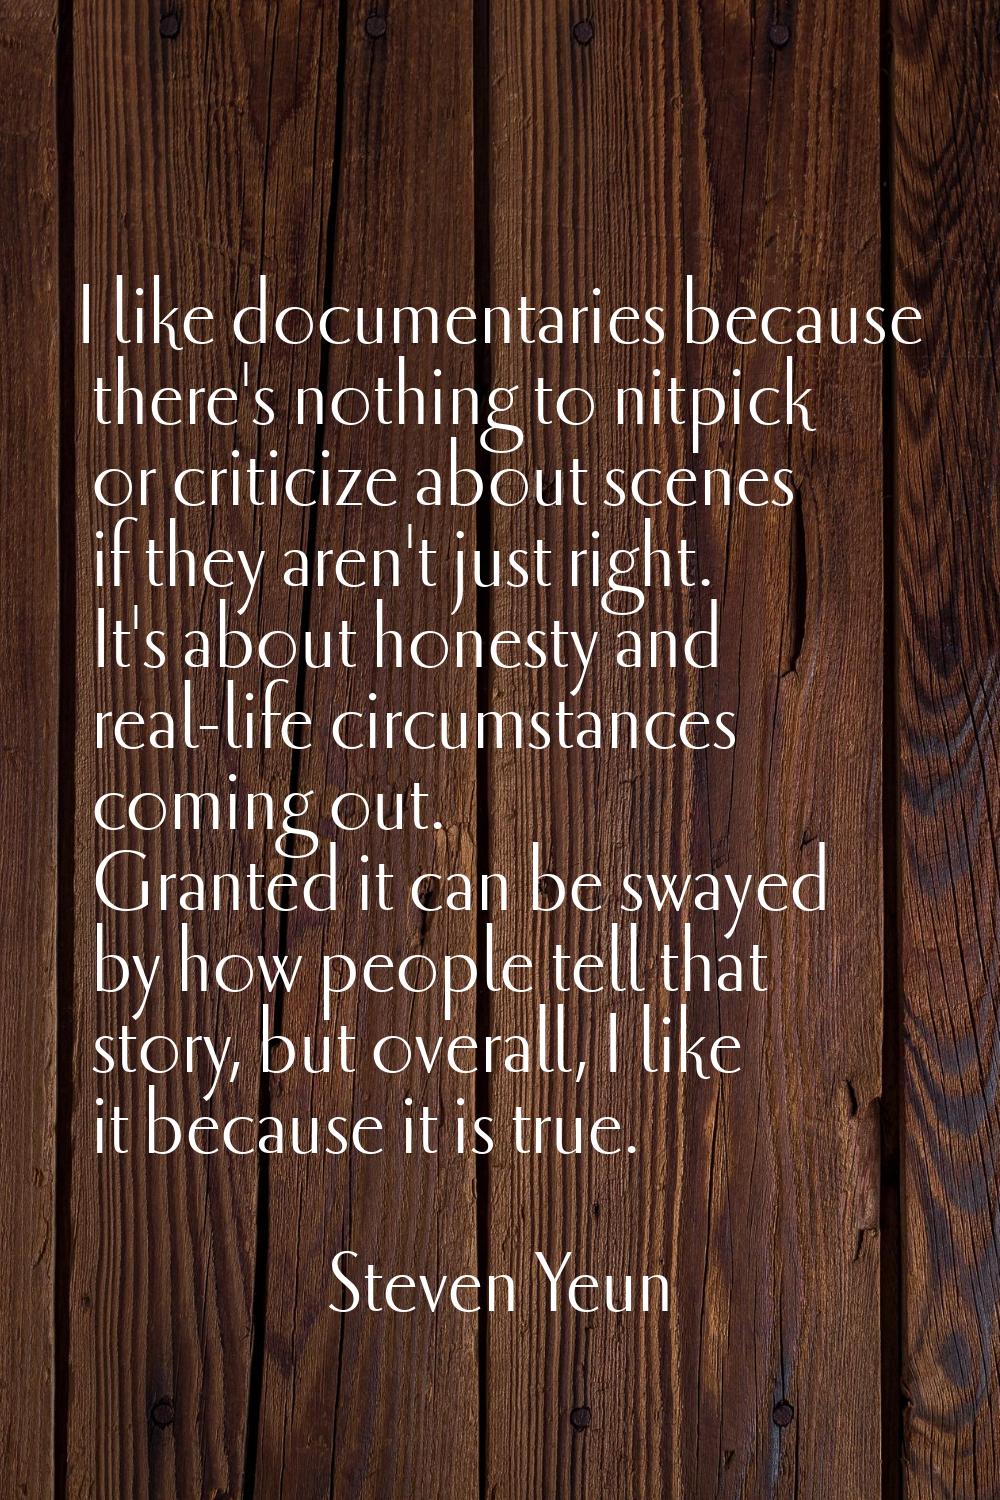 I like documentaries because there's nothing to nitpick or criticize about scenes if they aren't ju